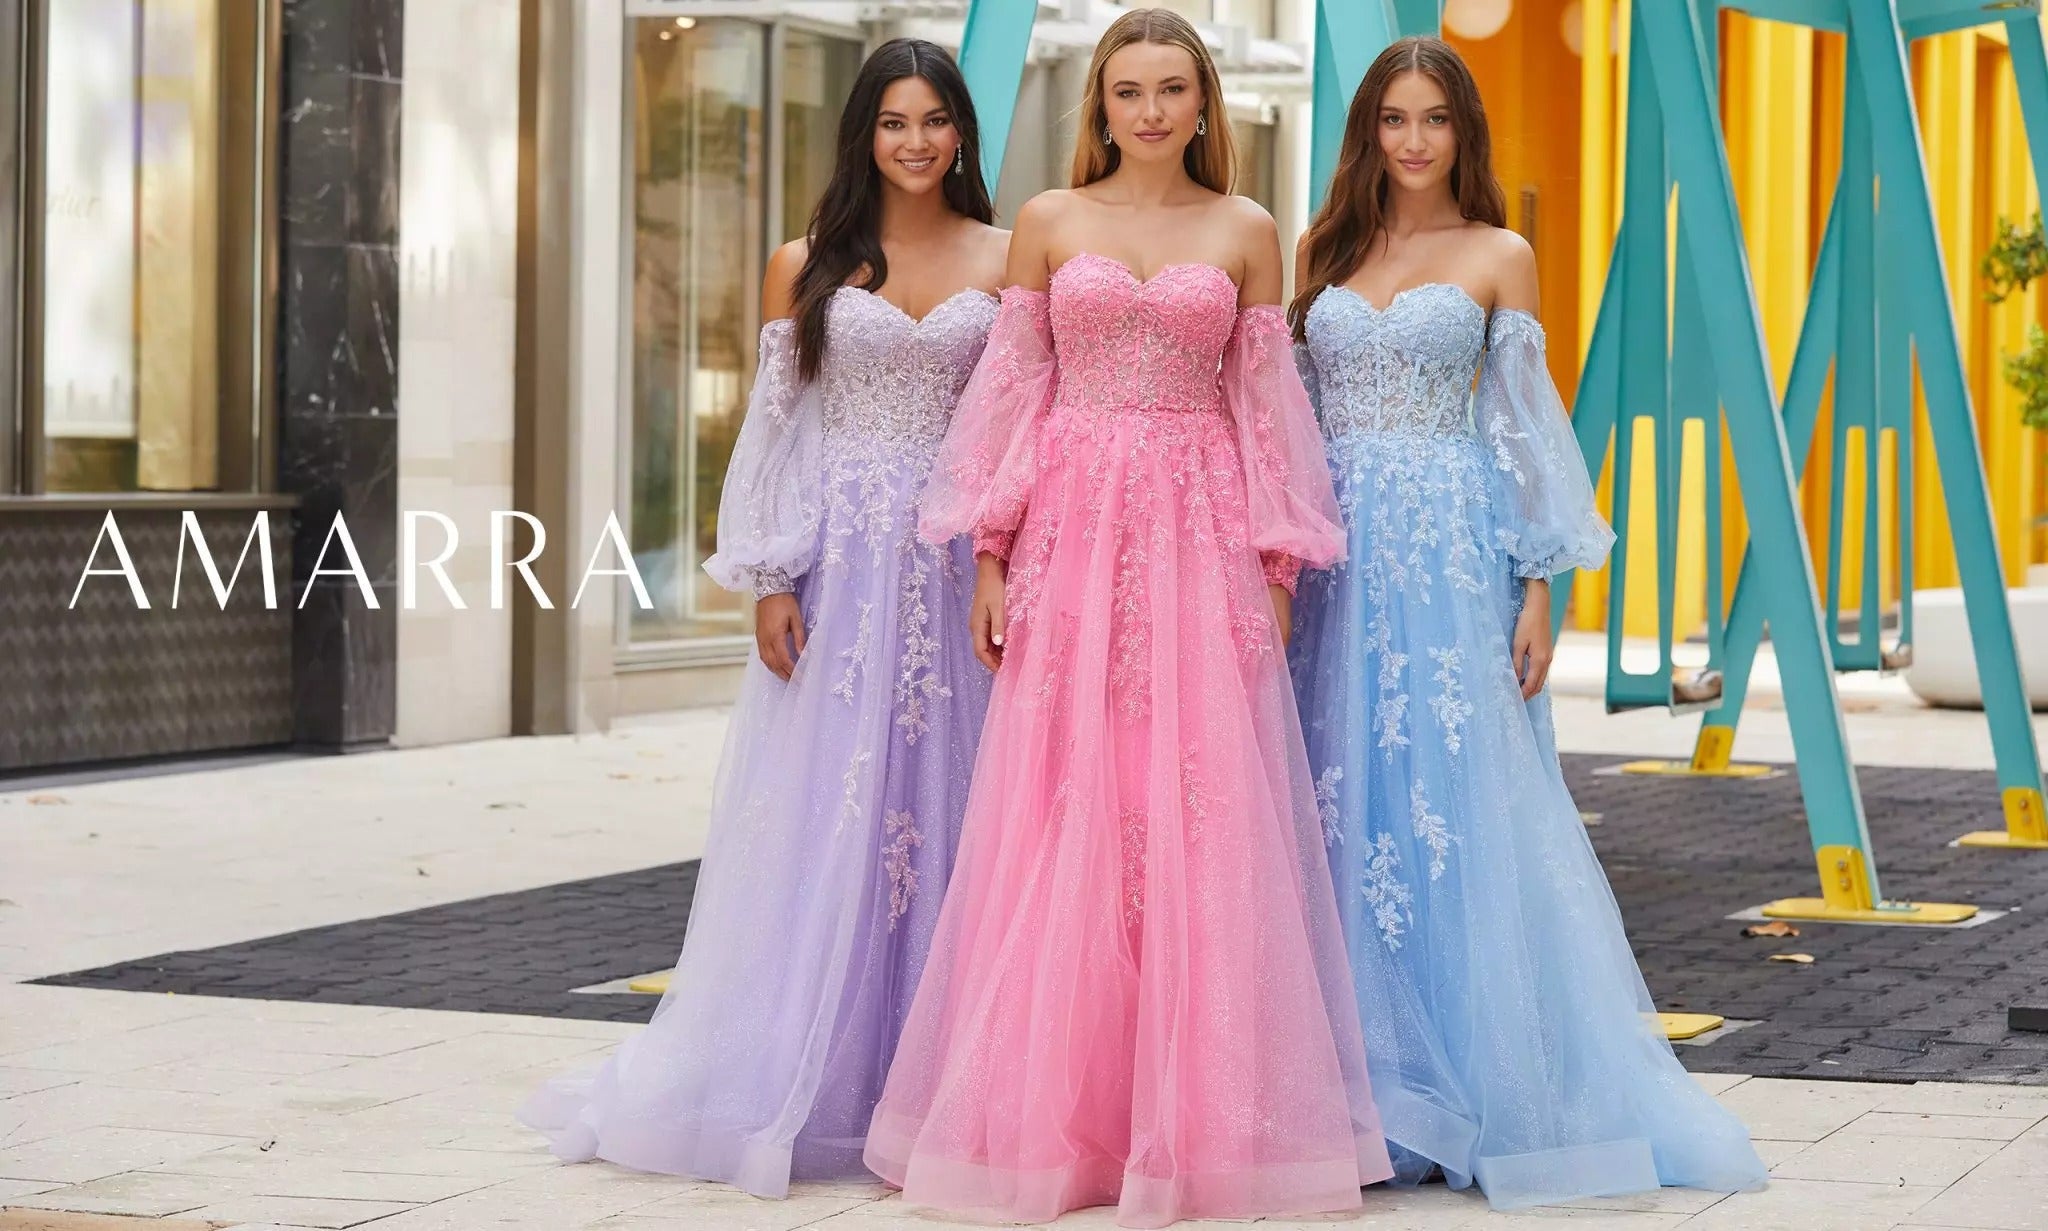 Several Mass. stores are well stocked for those seeking a prom dress